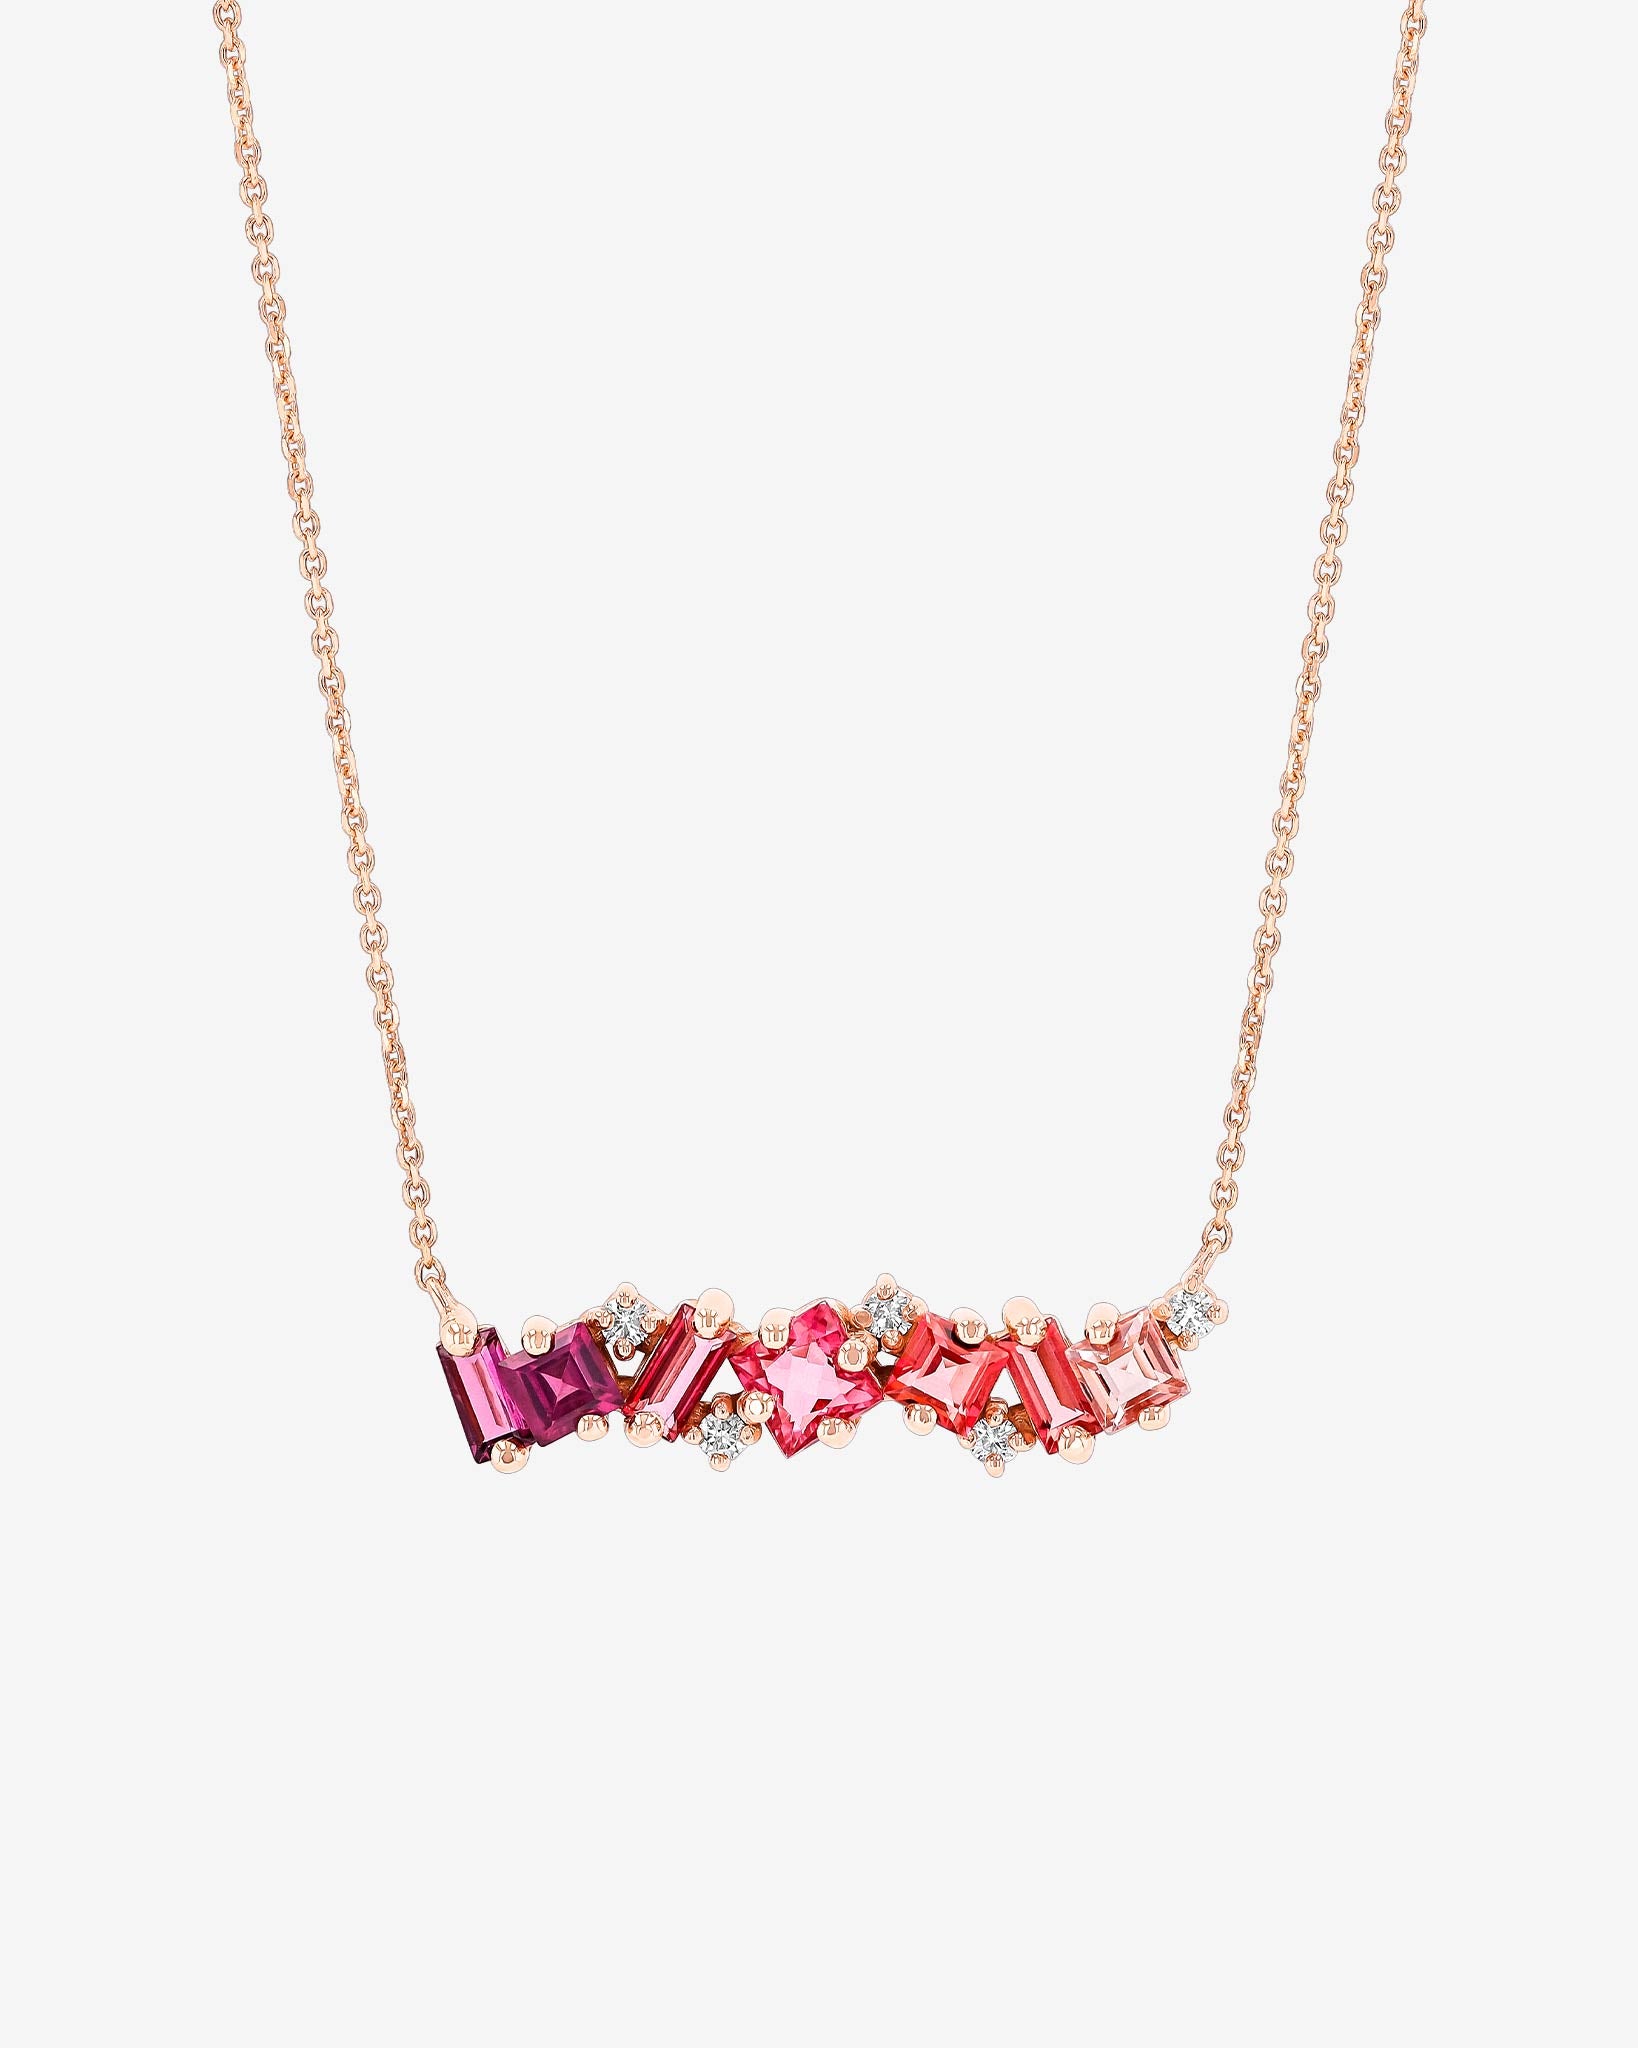 Kalan By Suzanne Kalan Nadima Red Ombre Milli Bar Pendant in 14k rose gold